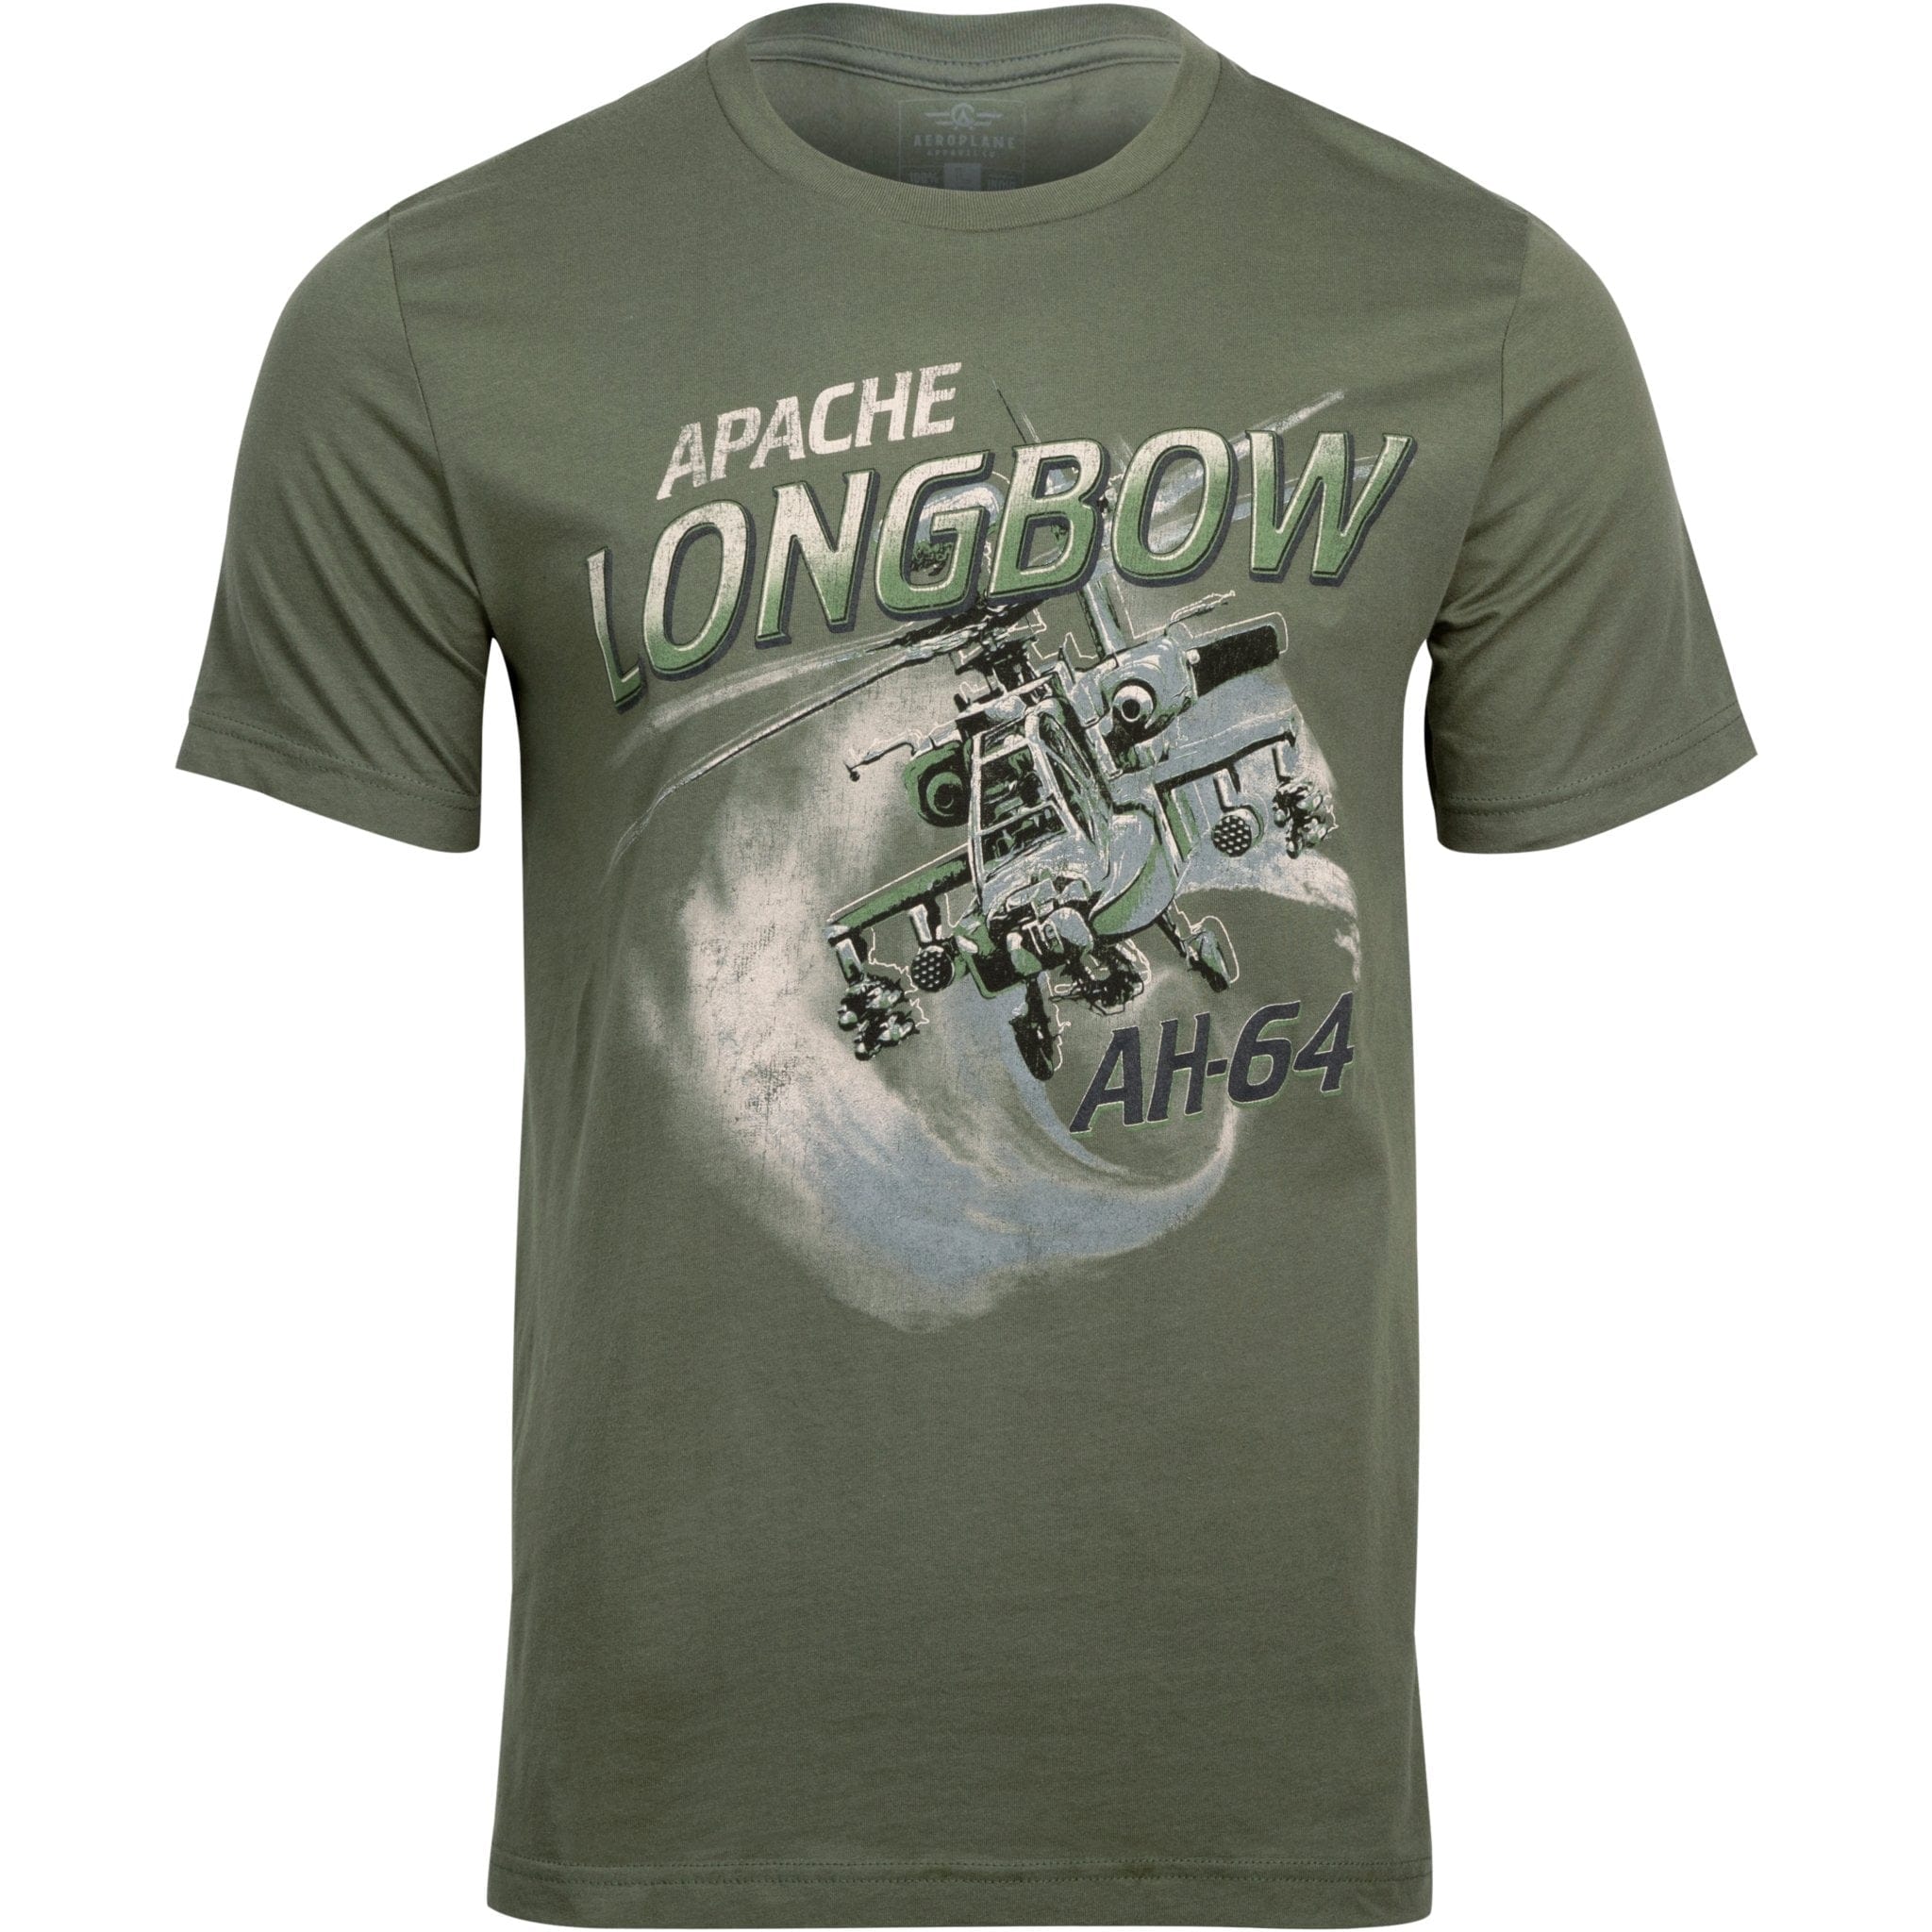 Apache Longbow AH-64 Officially Licensed Aeroplane Apparel Co. Men's T-Shirt